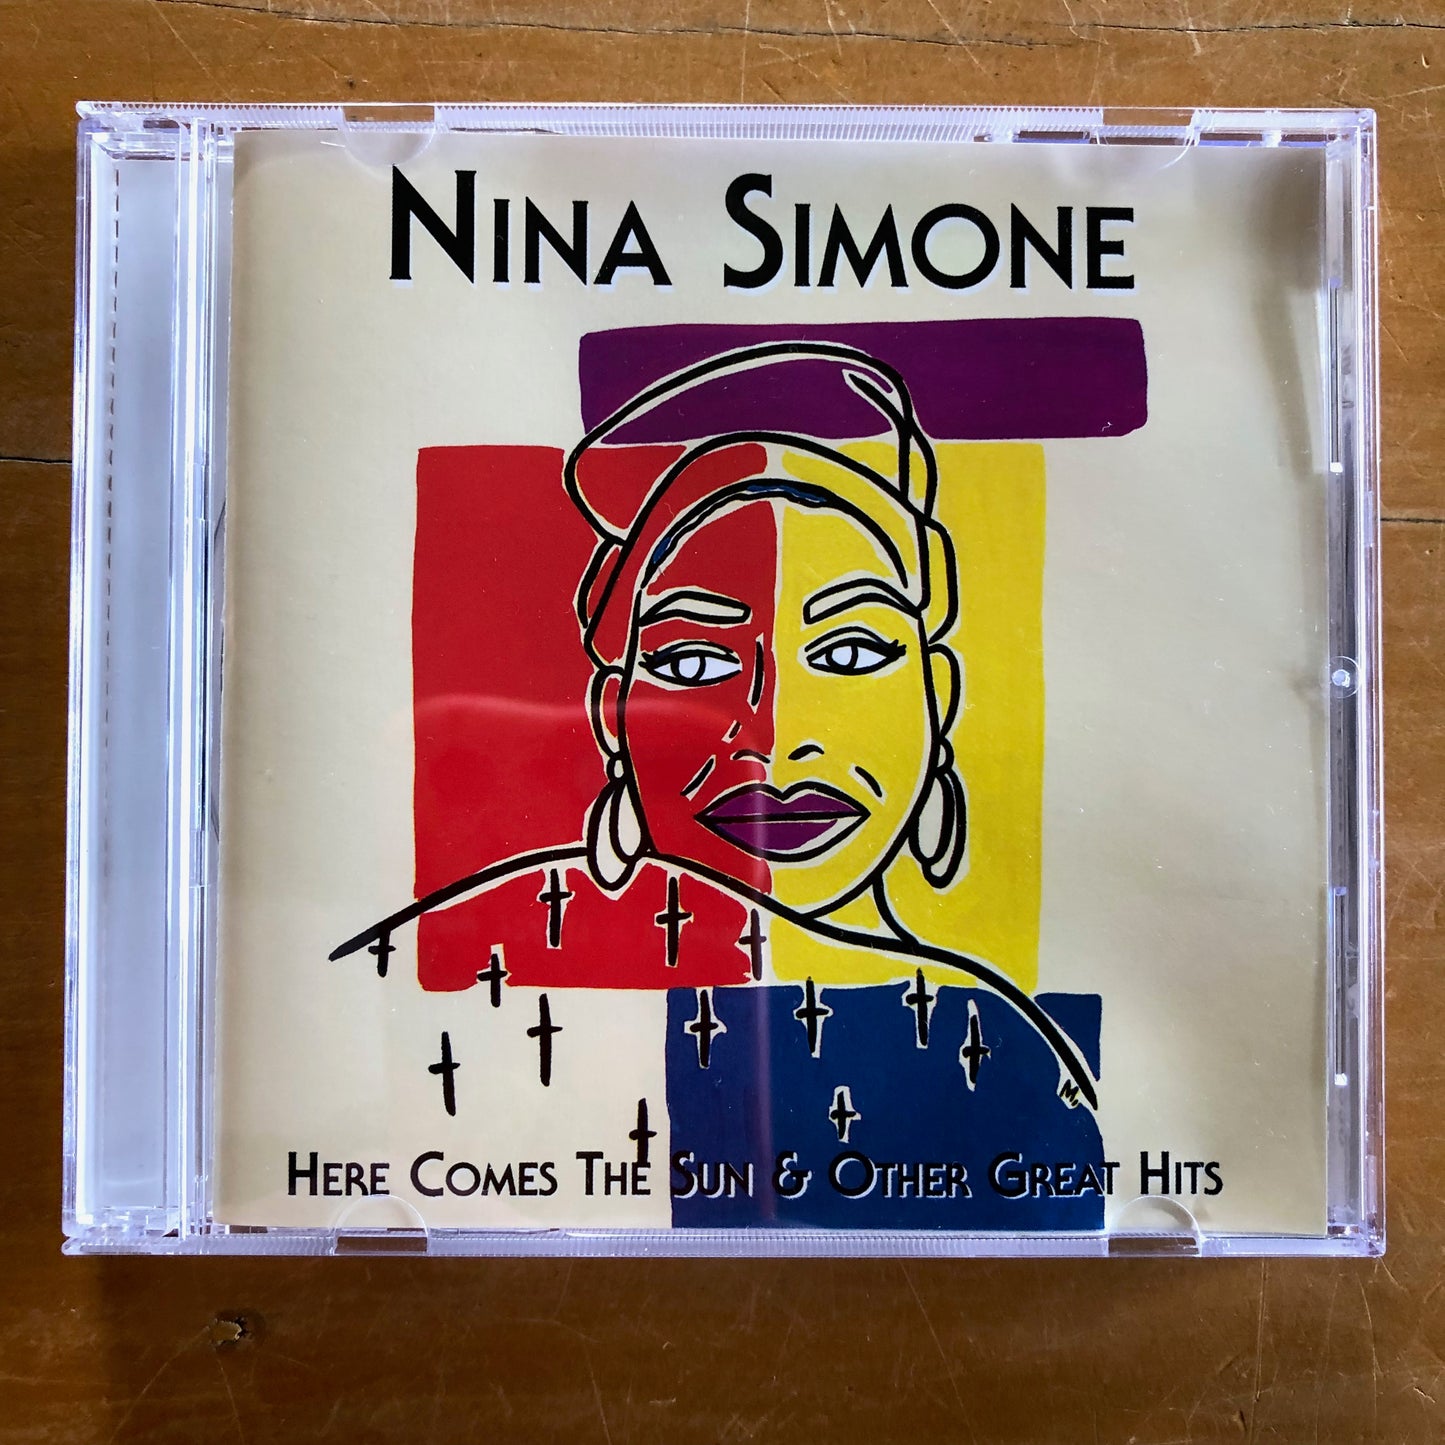 Nina Simone - Here Comes The Sun & Other Great Hits (CD)